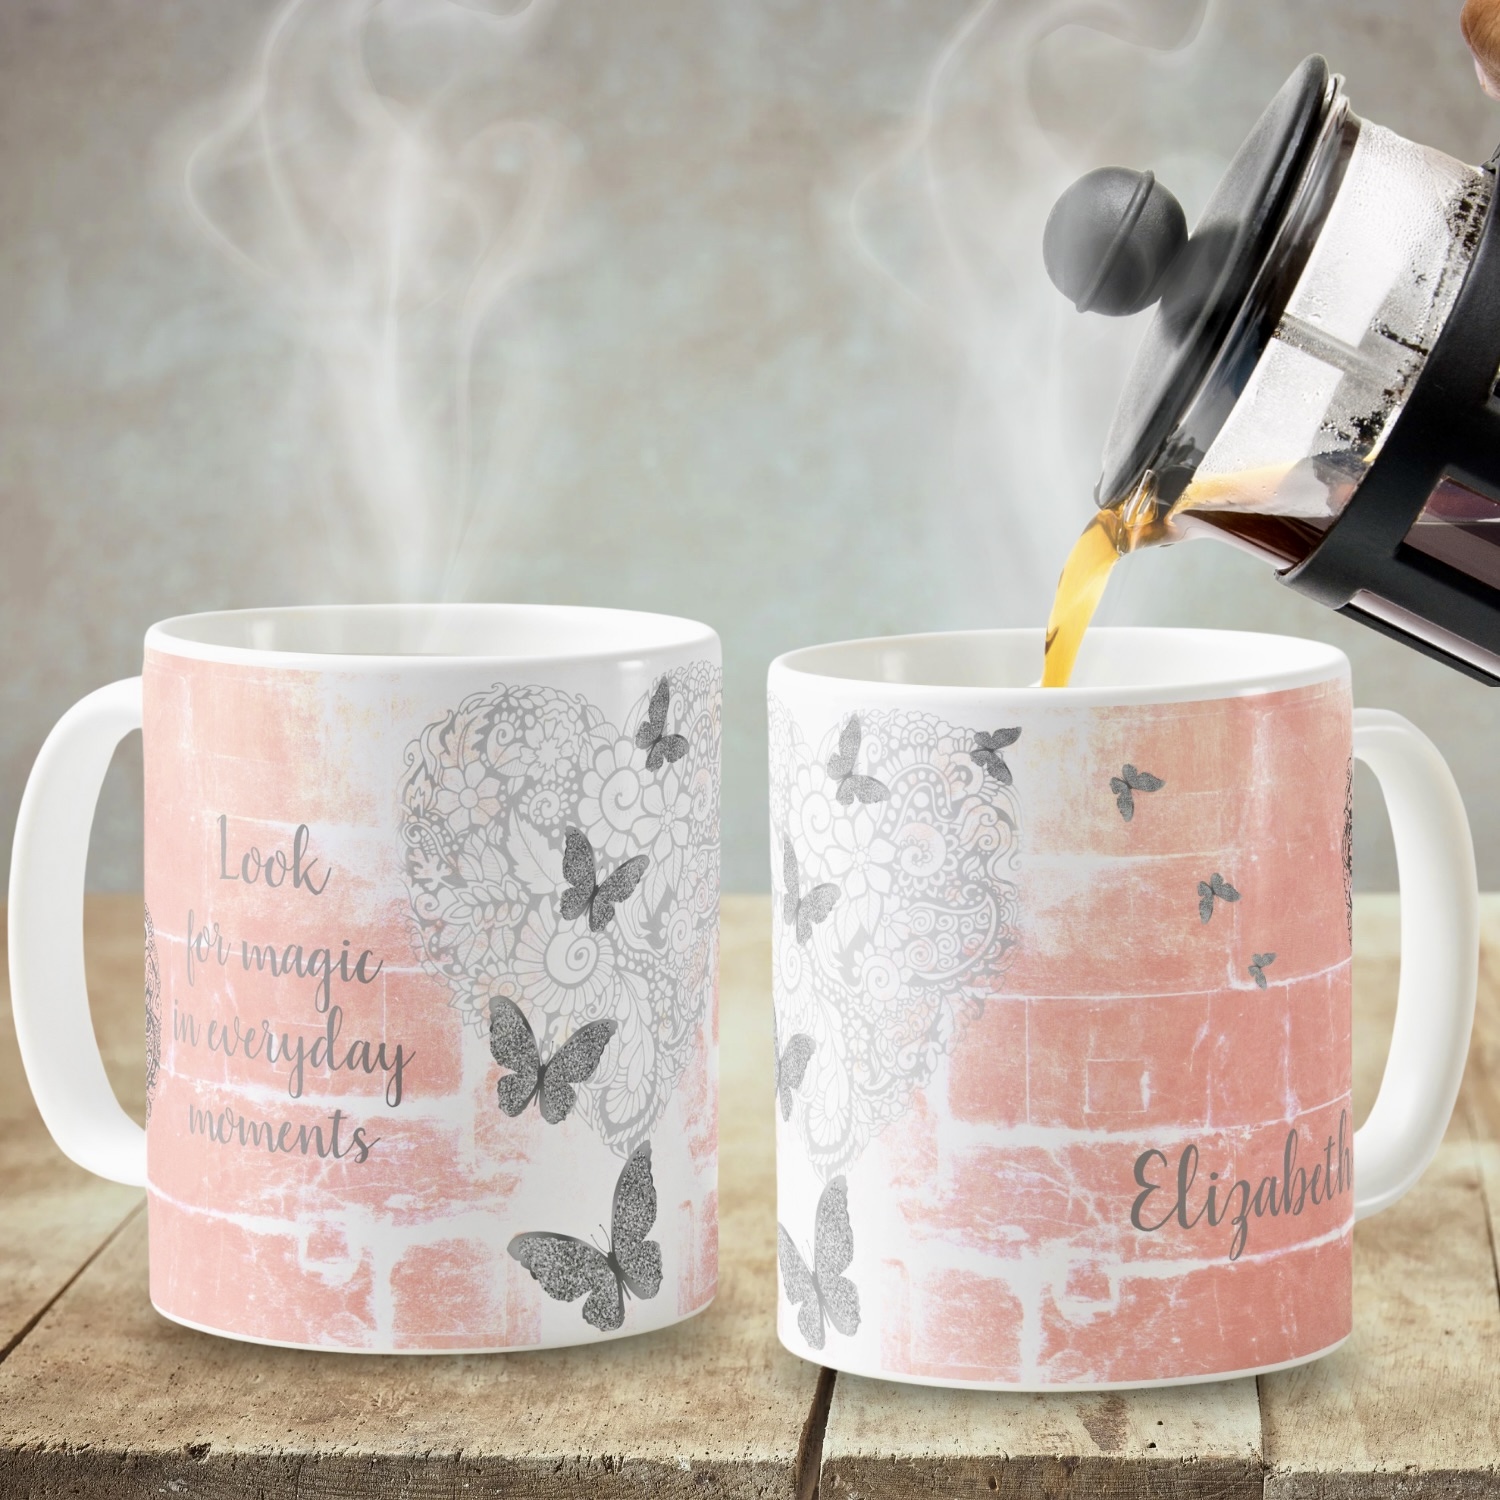 Two sides of a rustic peach mug featuring a gray heart surrounded by silver butterflies, adding charm and elegance to the design.